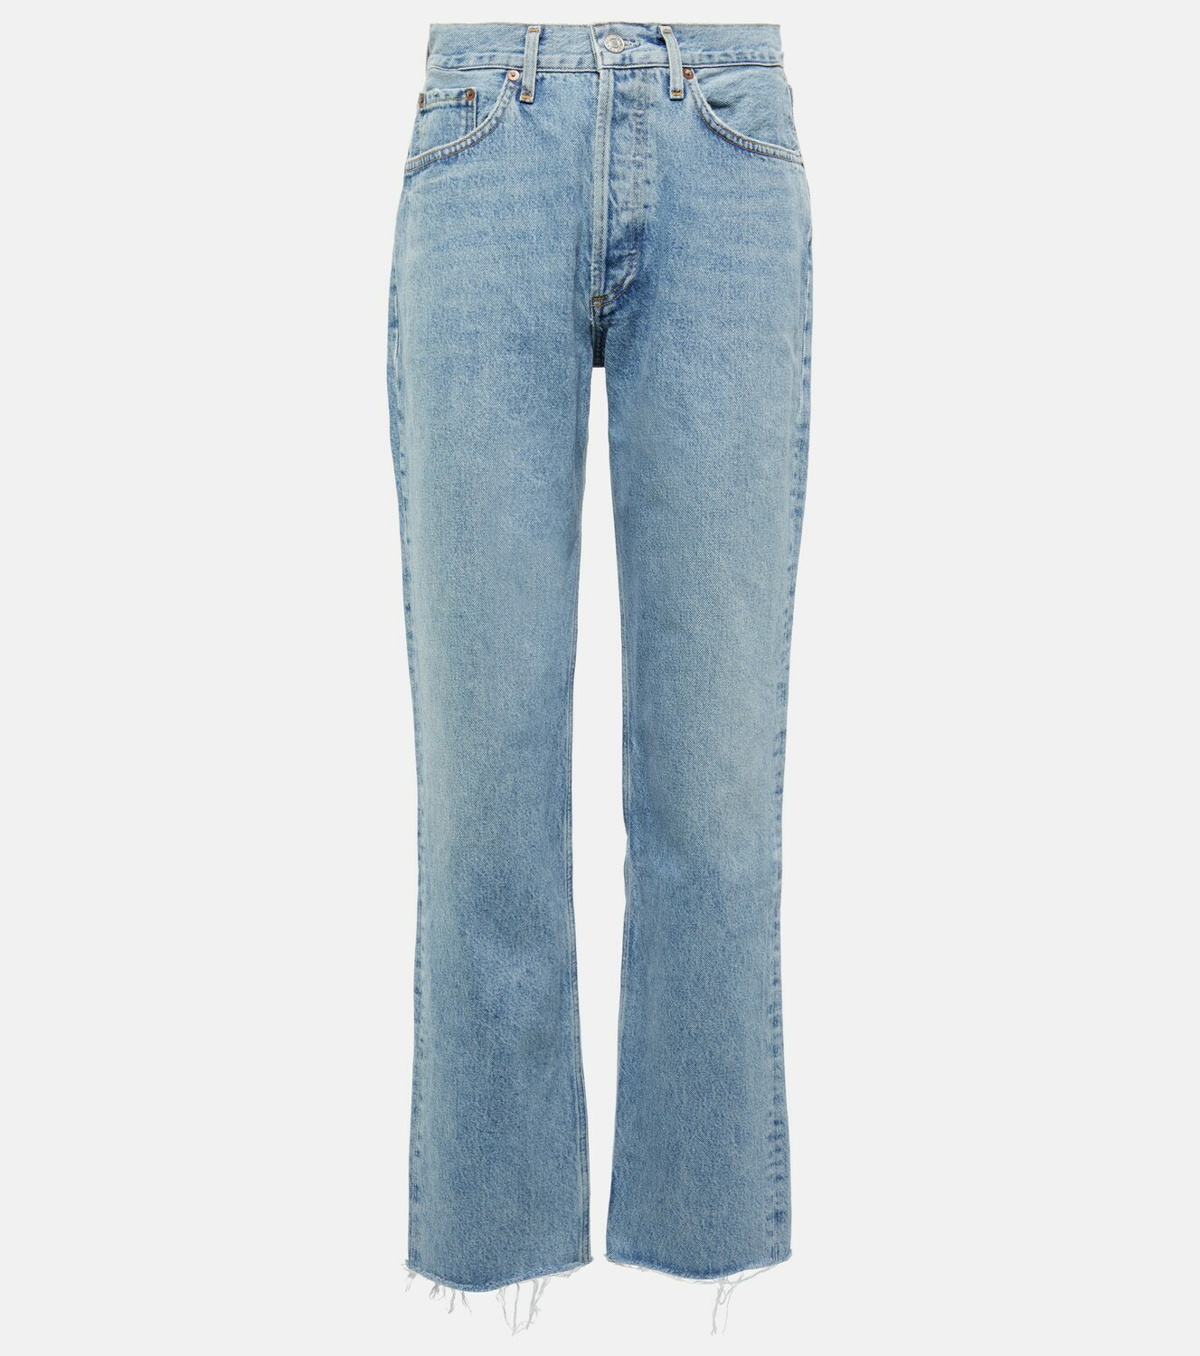 Agolde - Lana mid-rise jeans AGOLDE